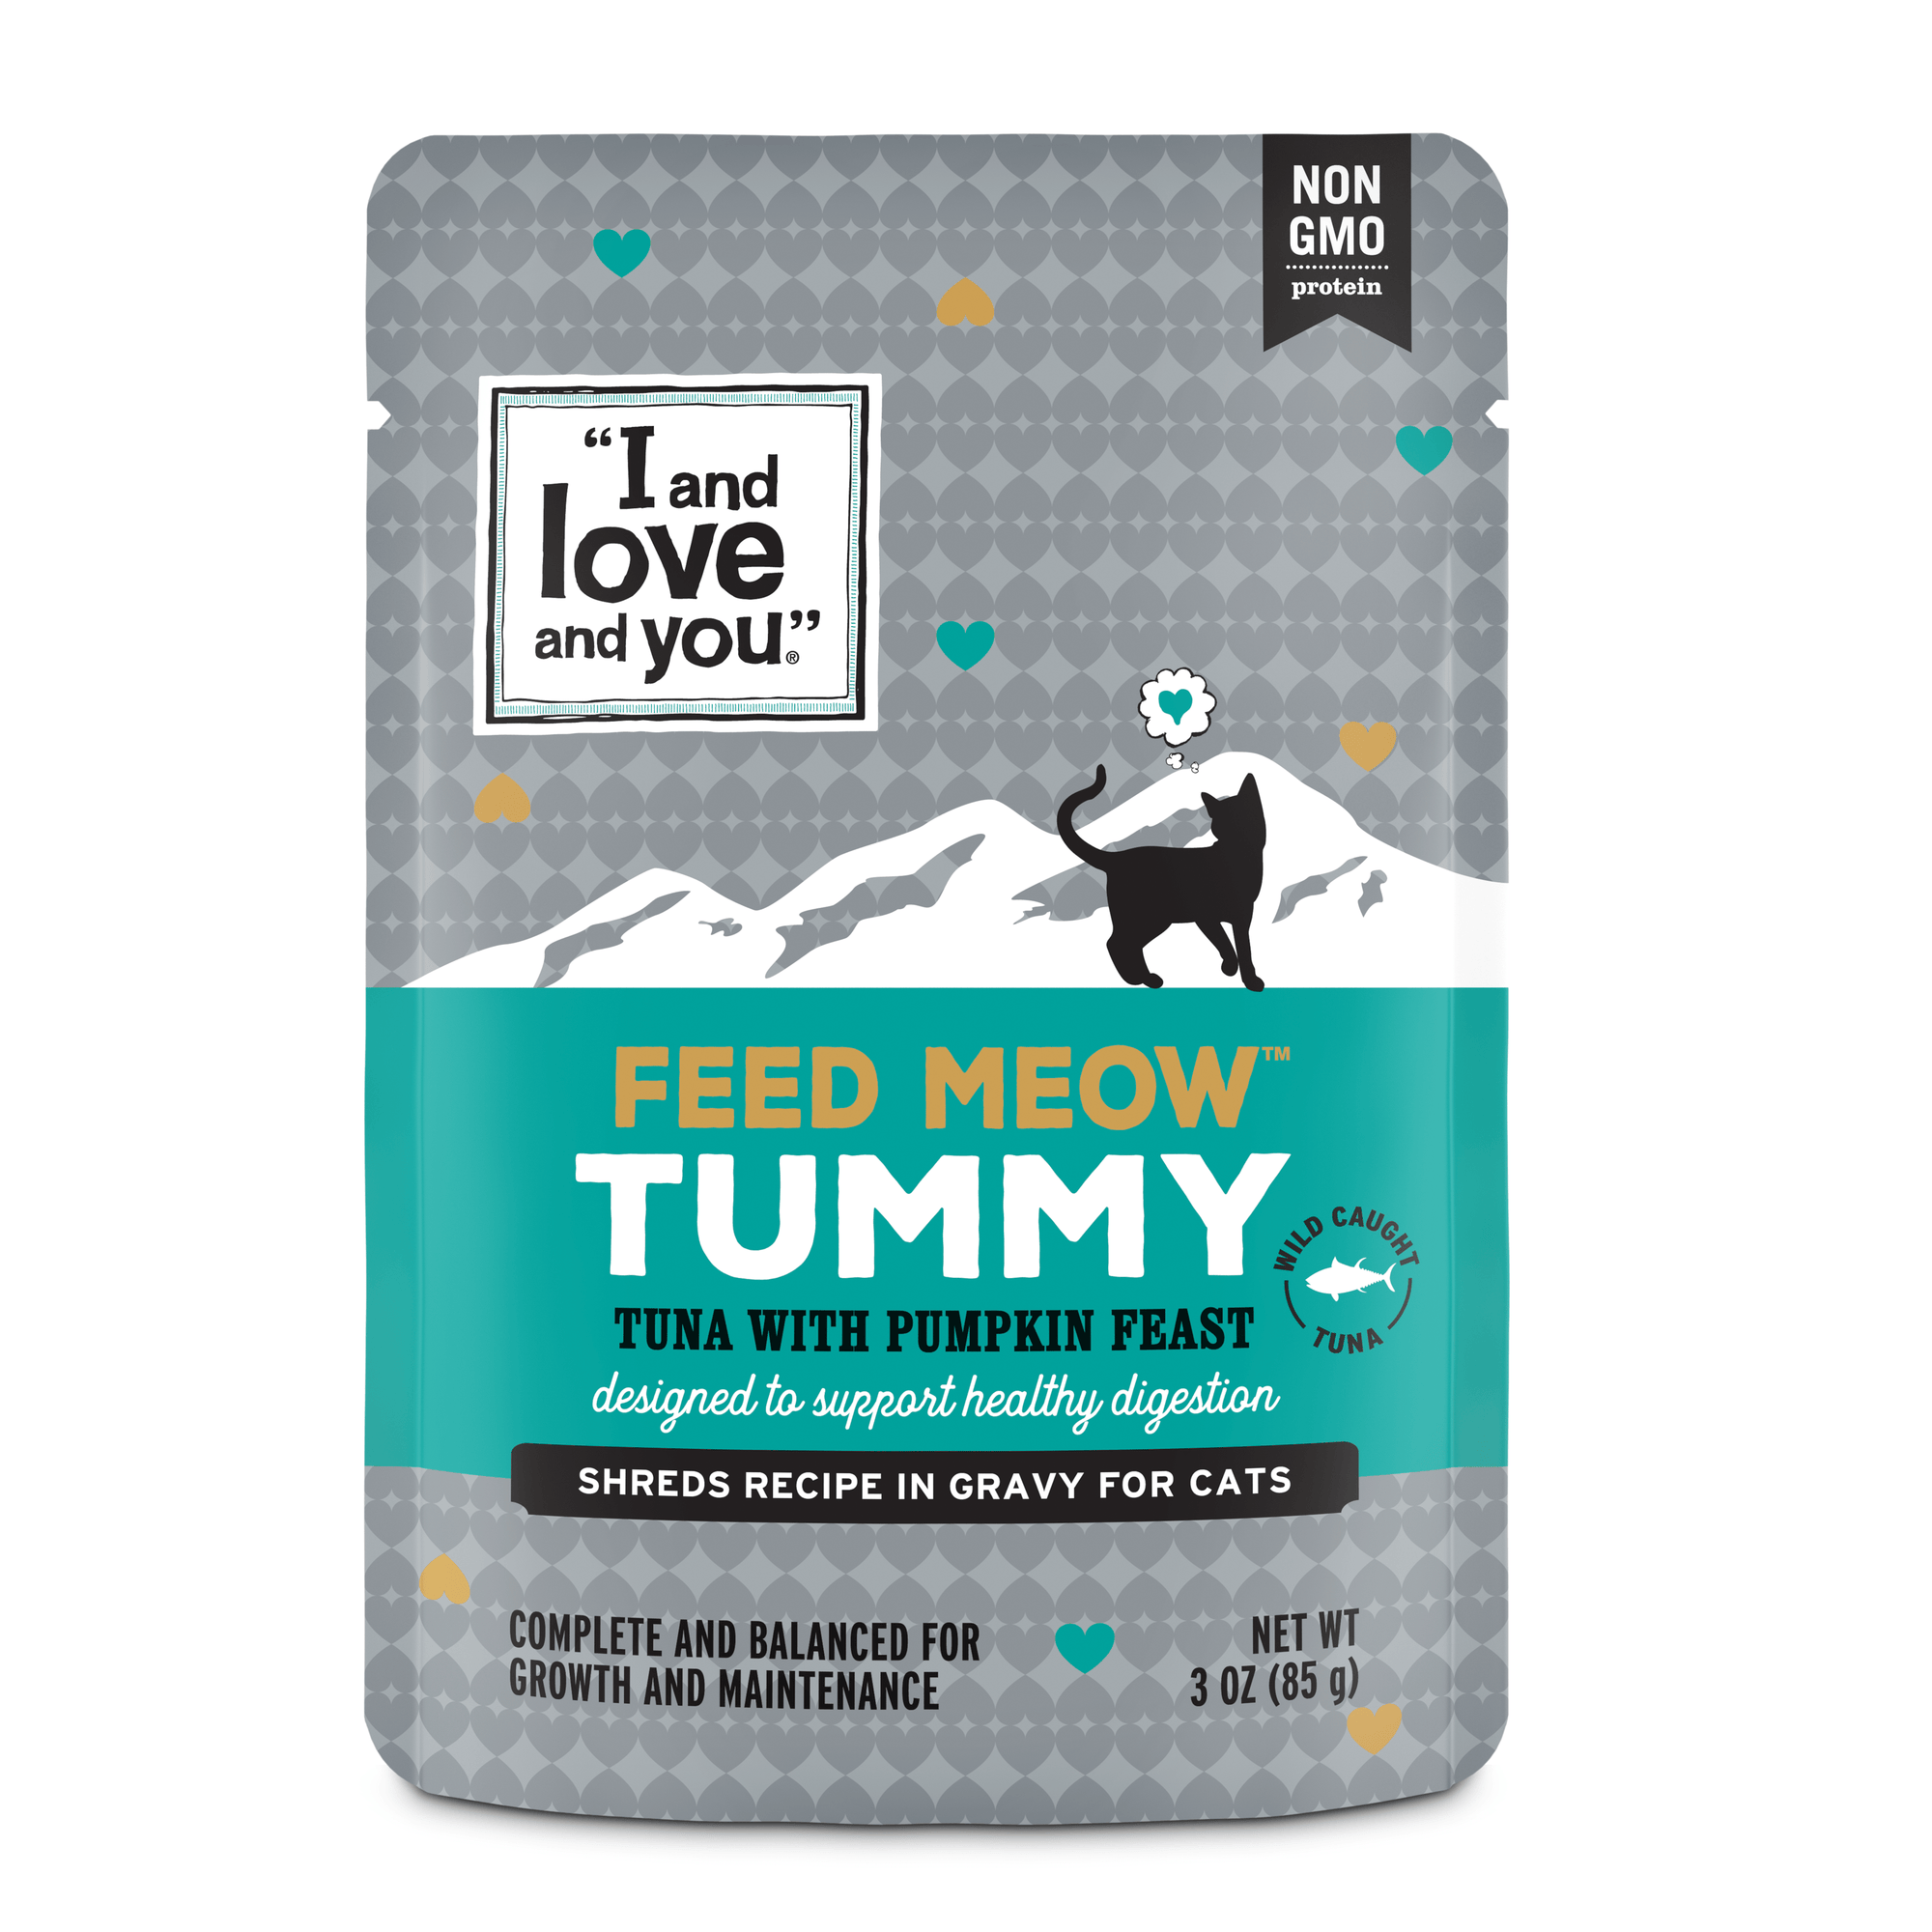 Feed Meow Tummy package with cat silhouette and sign text.